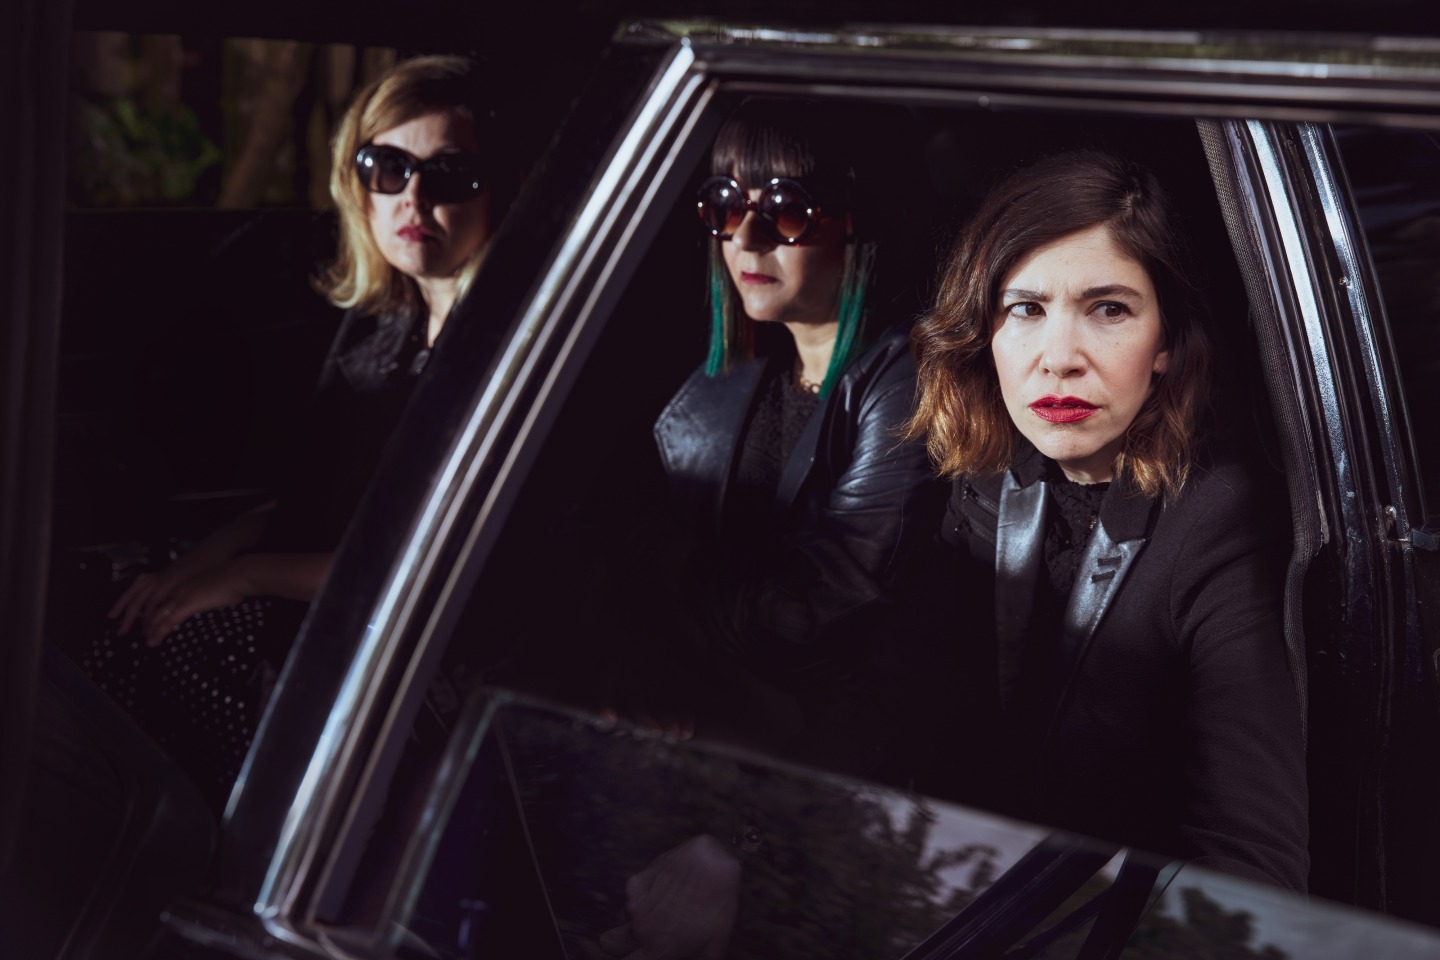 The death and rebirth of Sleater-Kinney